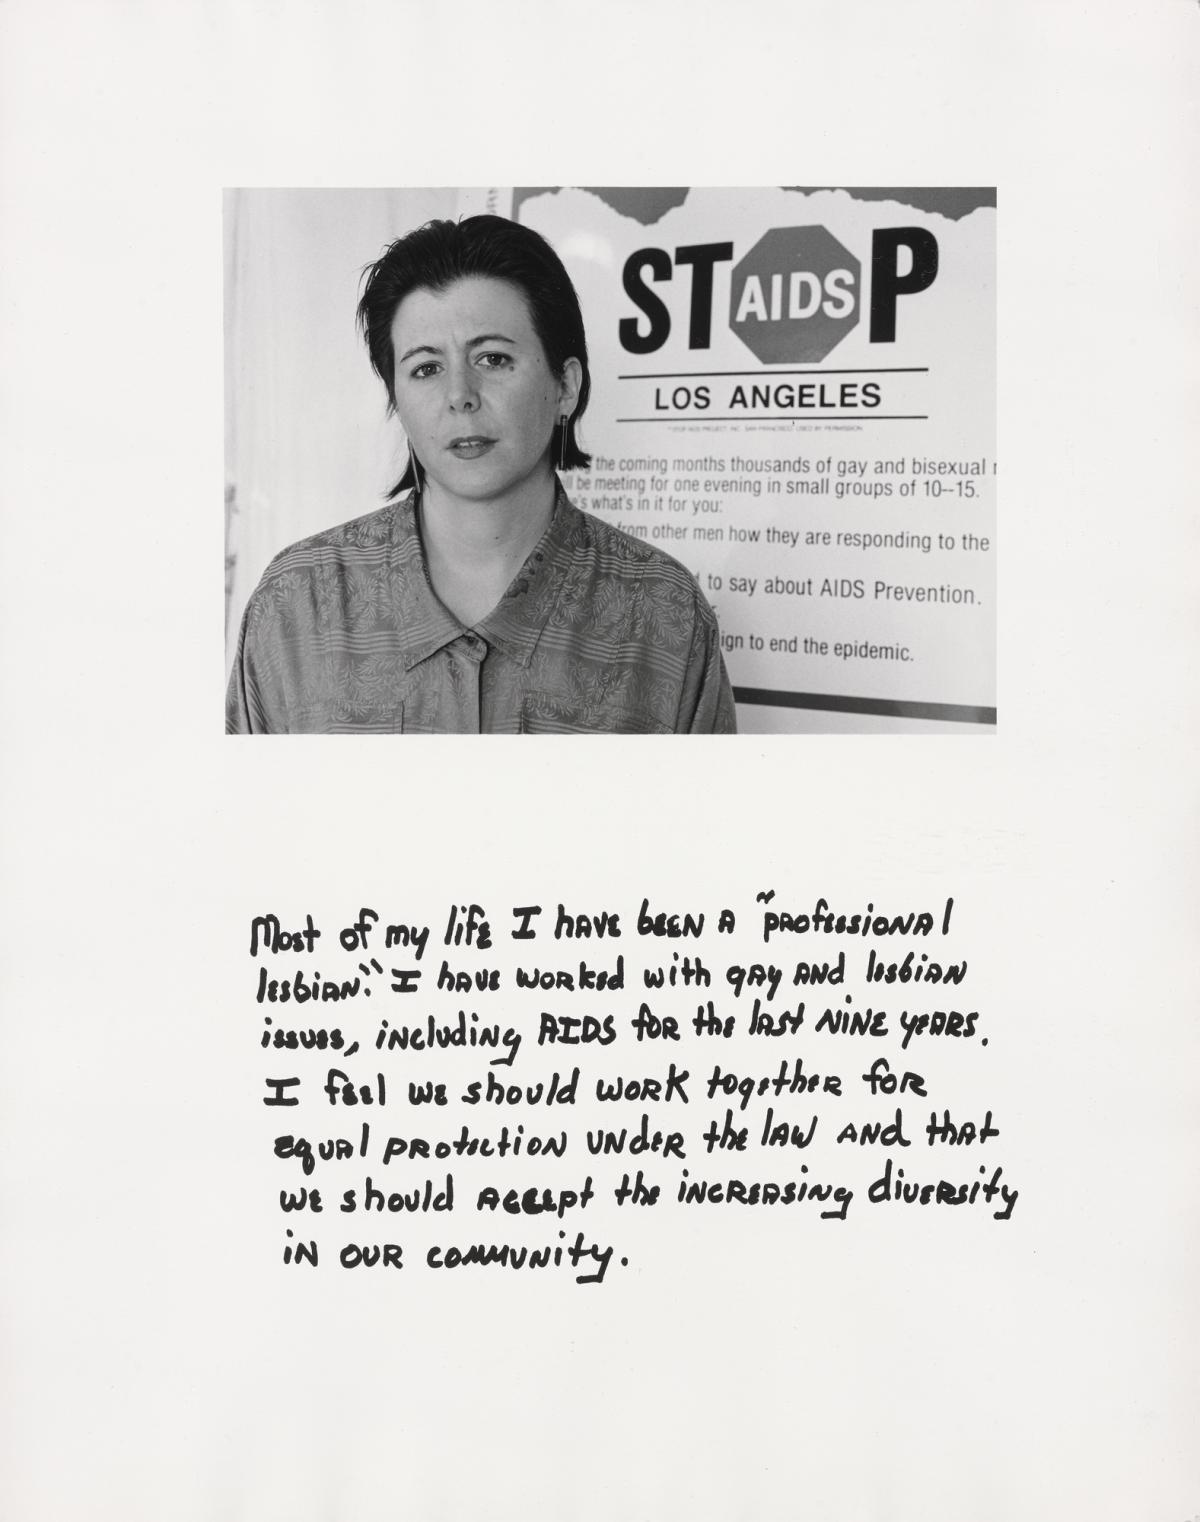 A photograph of a short haired woman with the words "Stop AIDS Los Angeles" behind her and text below her.